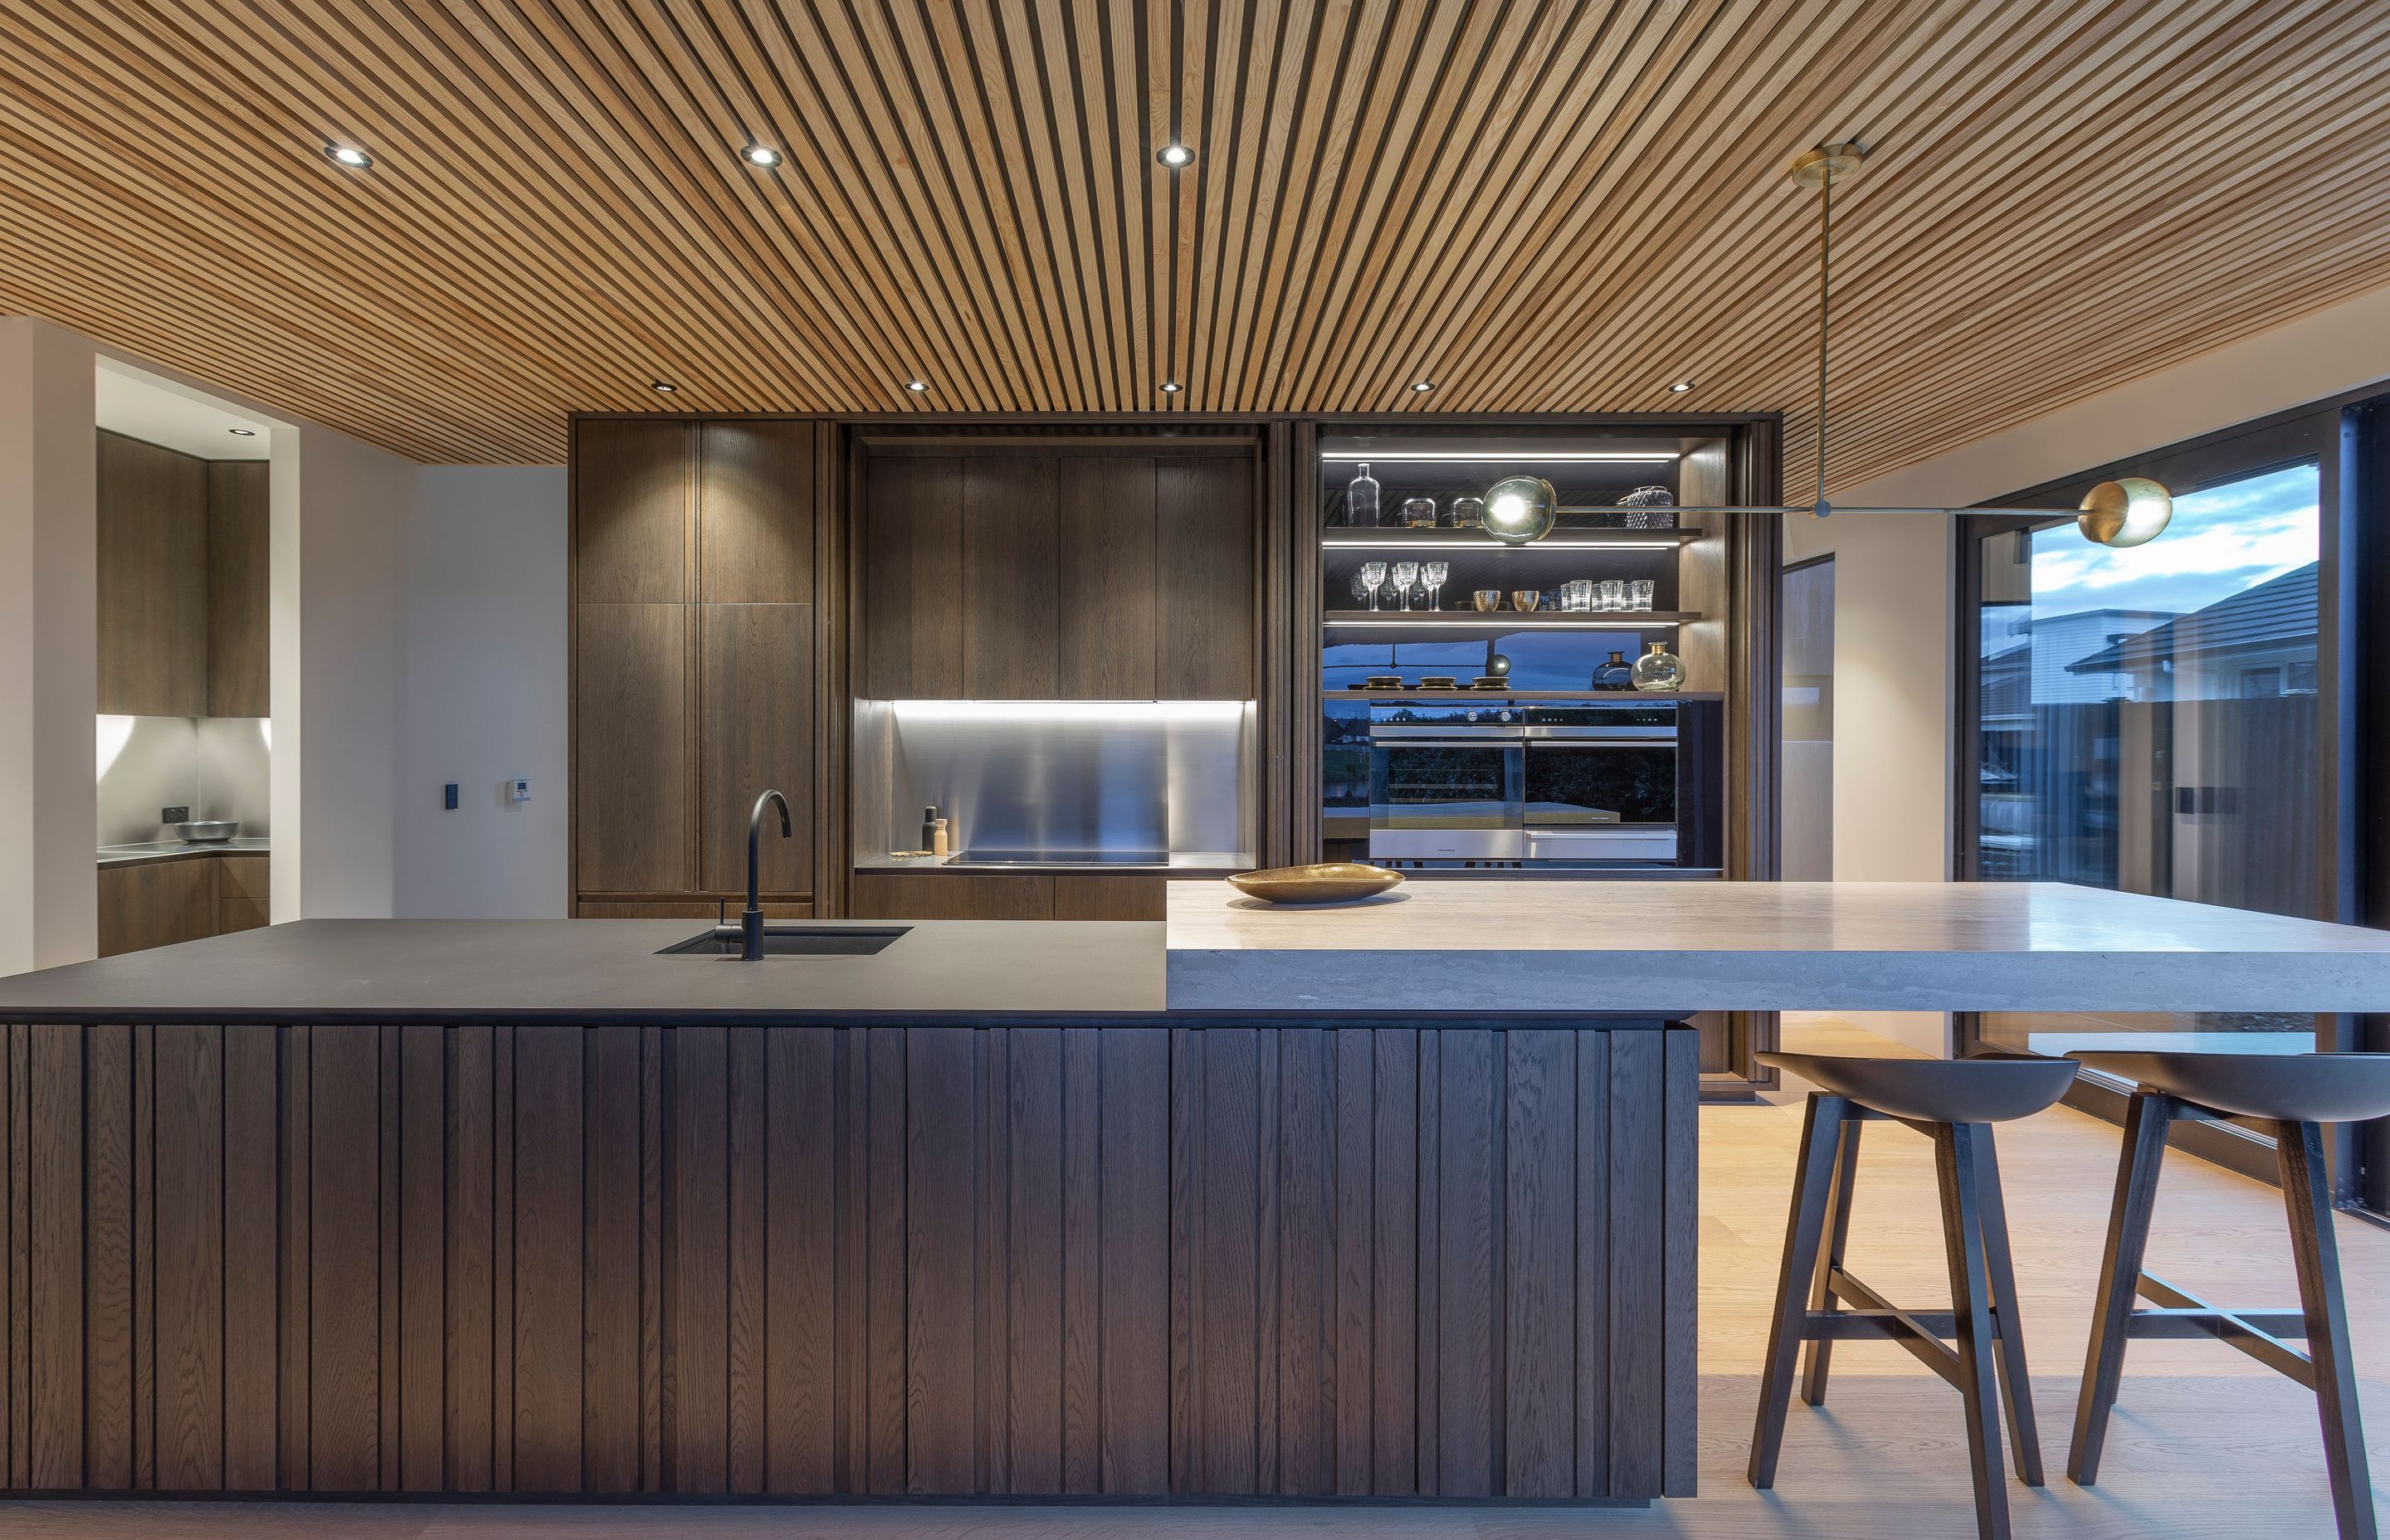 Dramatic kitchen with handleless design in a rural setting